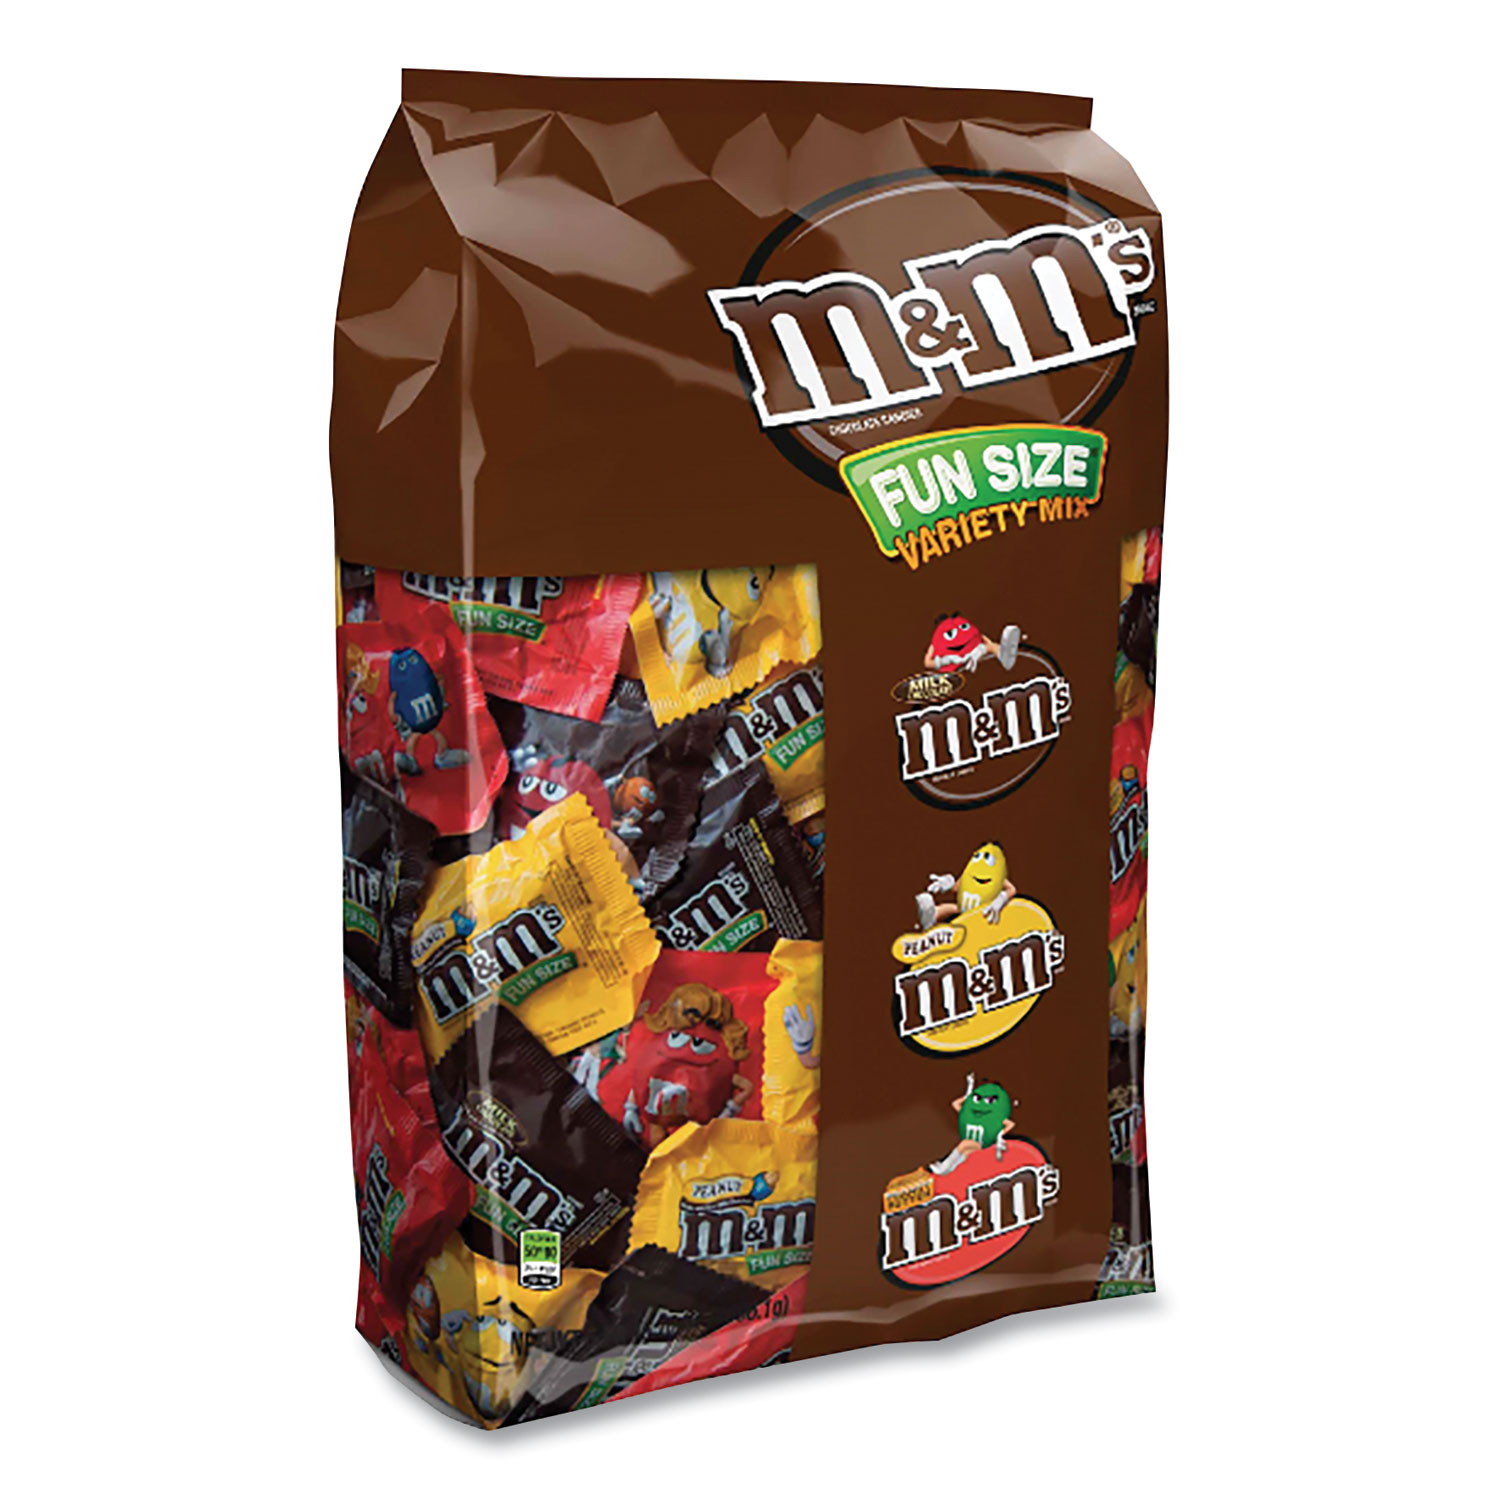 M&M's - M&M's, Chocolate Candies, Lovers, Fun Size (55 count